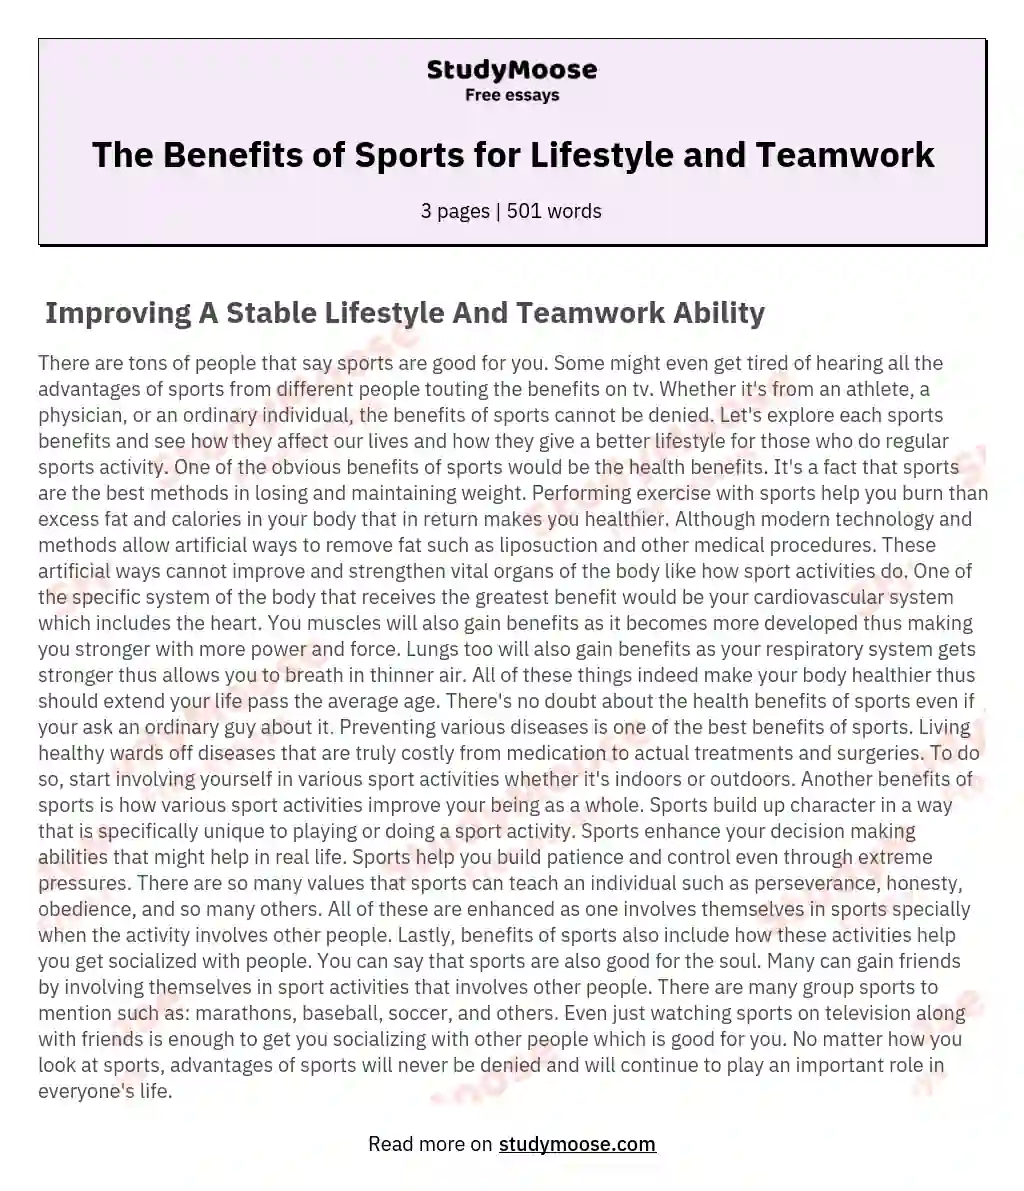 The Benefits of Sports for Lifestyle and Teamwork essay